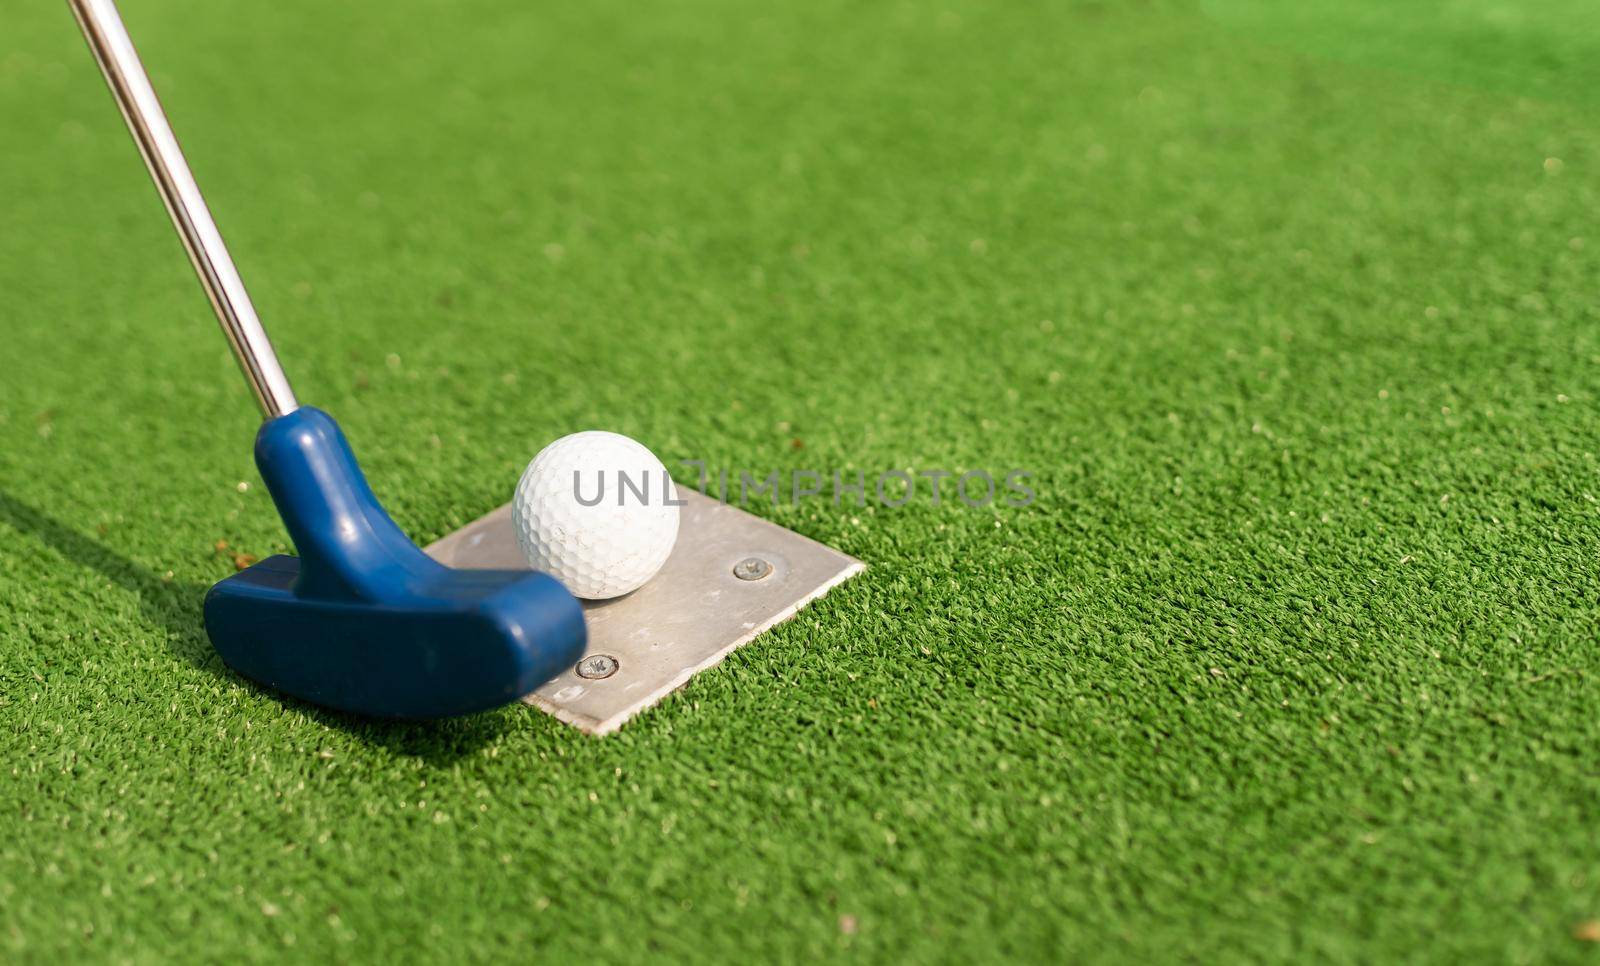 A golf club and a ball during a mini golf game by Andelov13